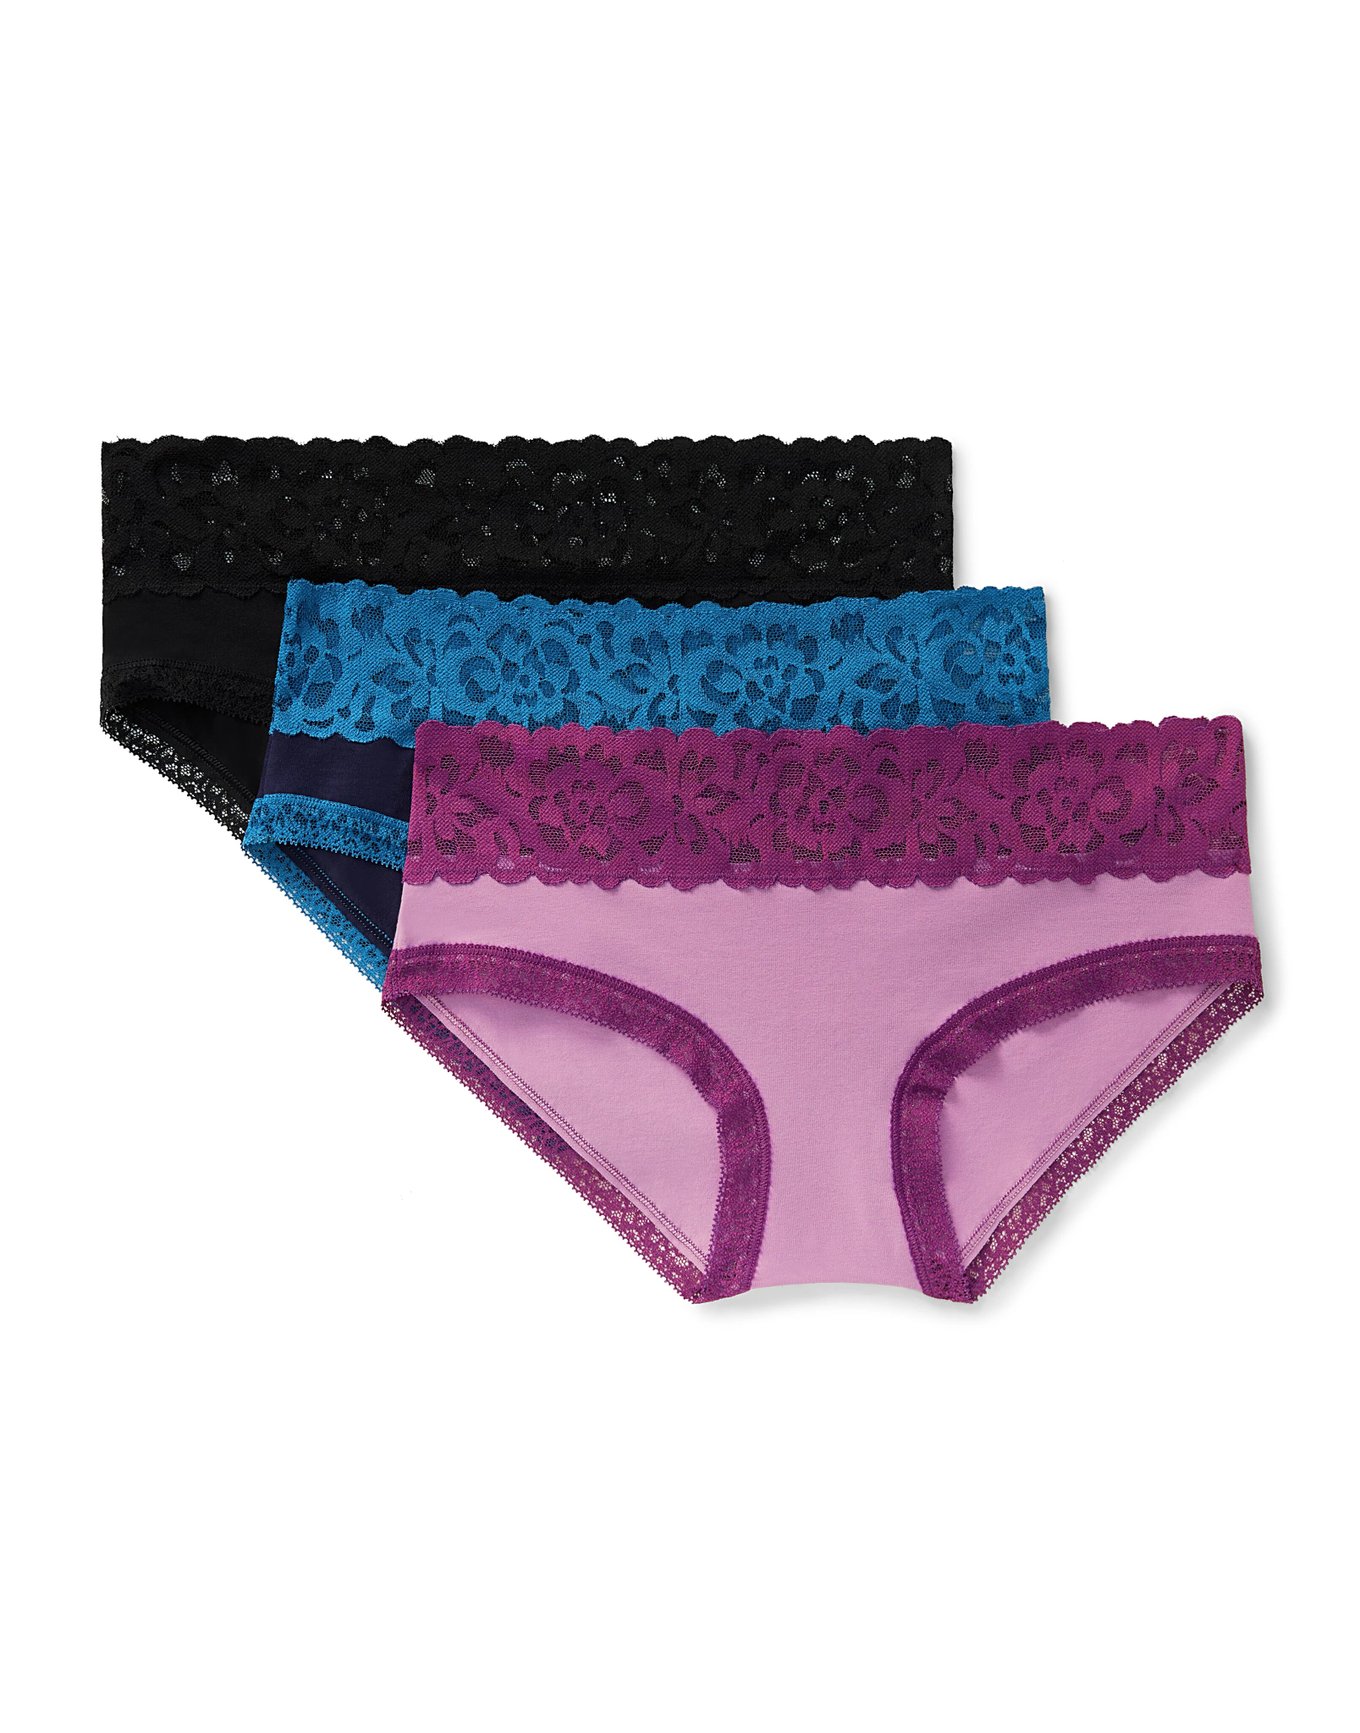 Hipster Women High Quality Cotton Printed Bra Panty Set (3 Colours